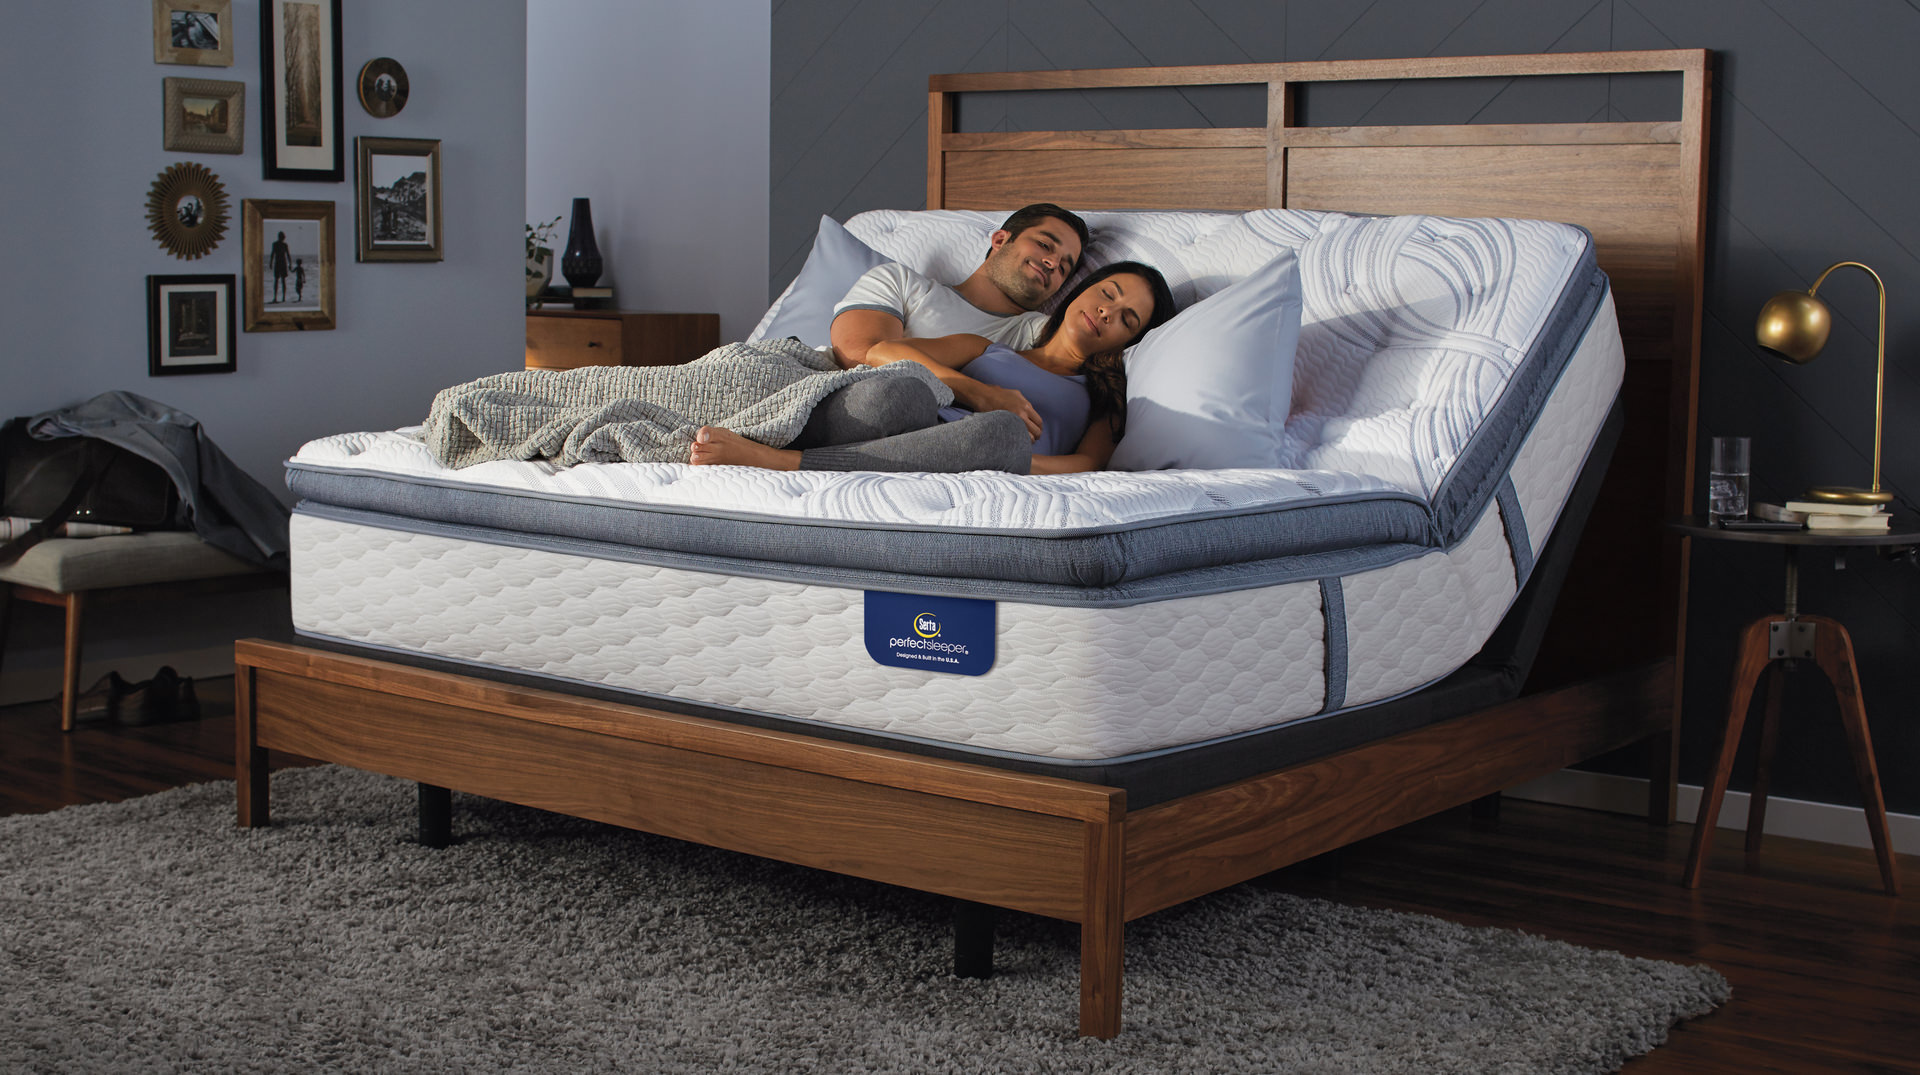 can daybeds have adjustable mattress